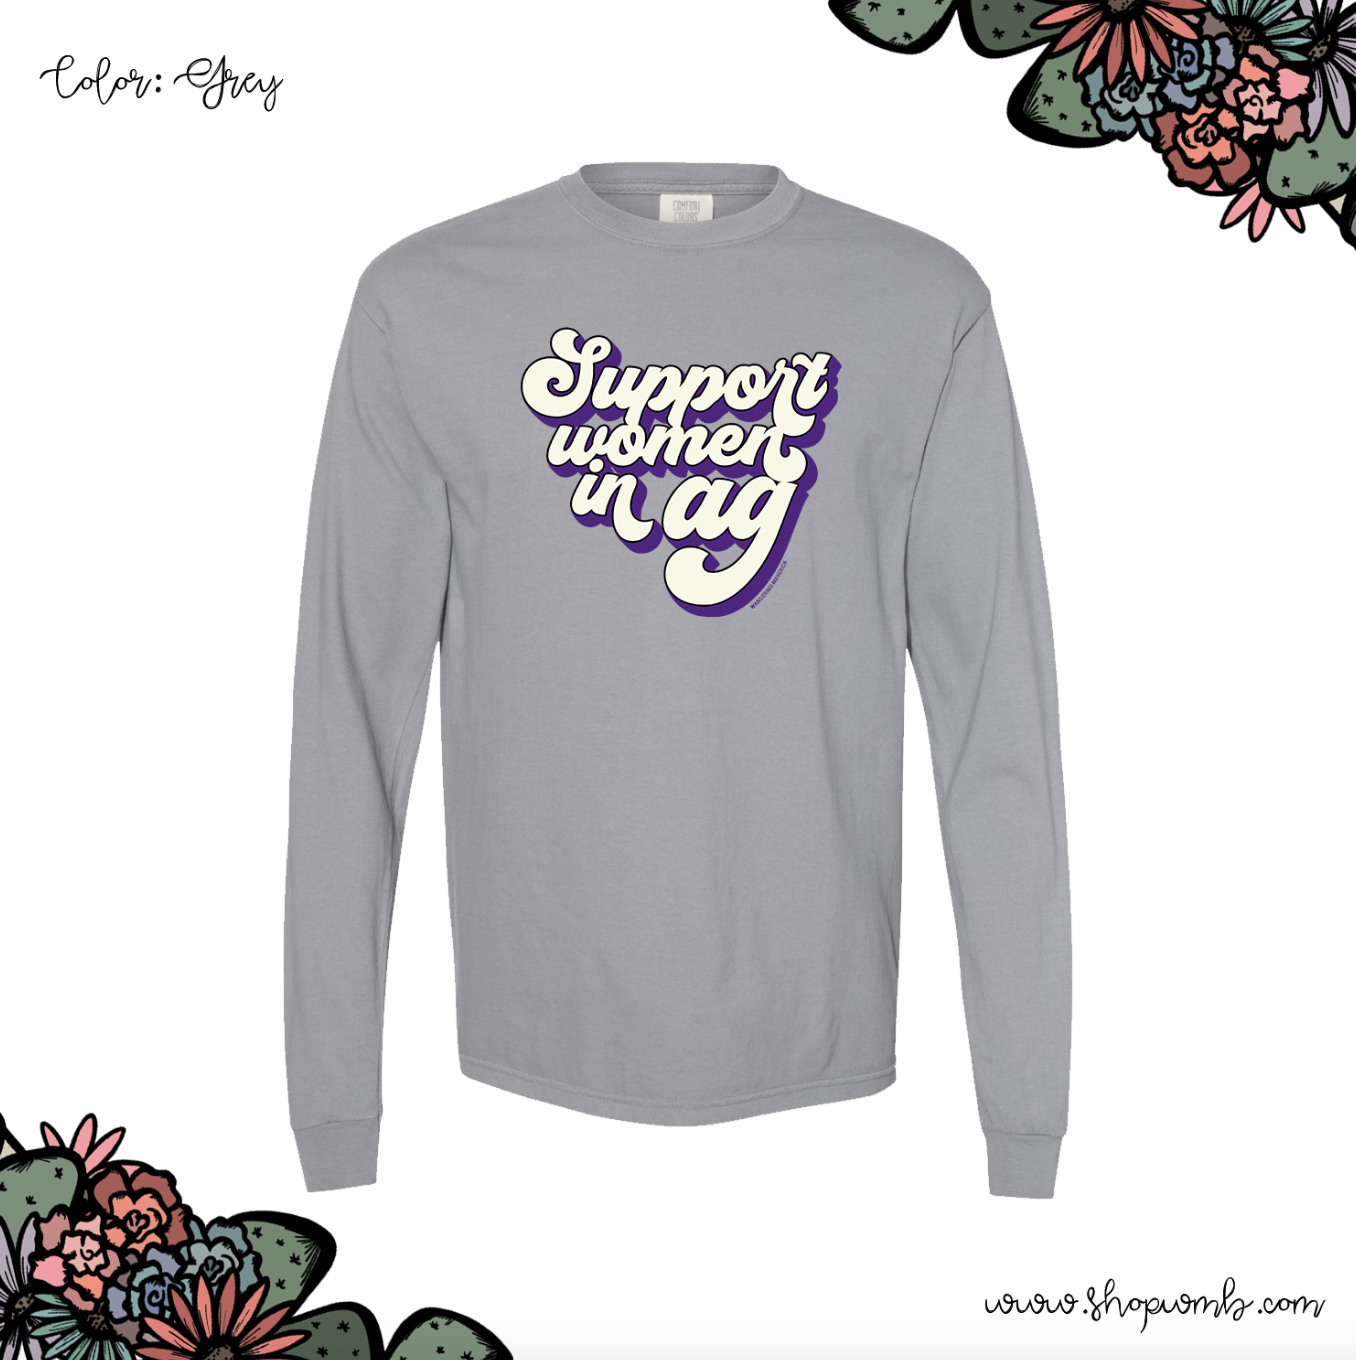 Retro Support Women In Ag Purple LONG SLEEVE T-Shirt (S-3XL) - Multiple Colors!